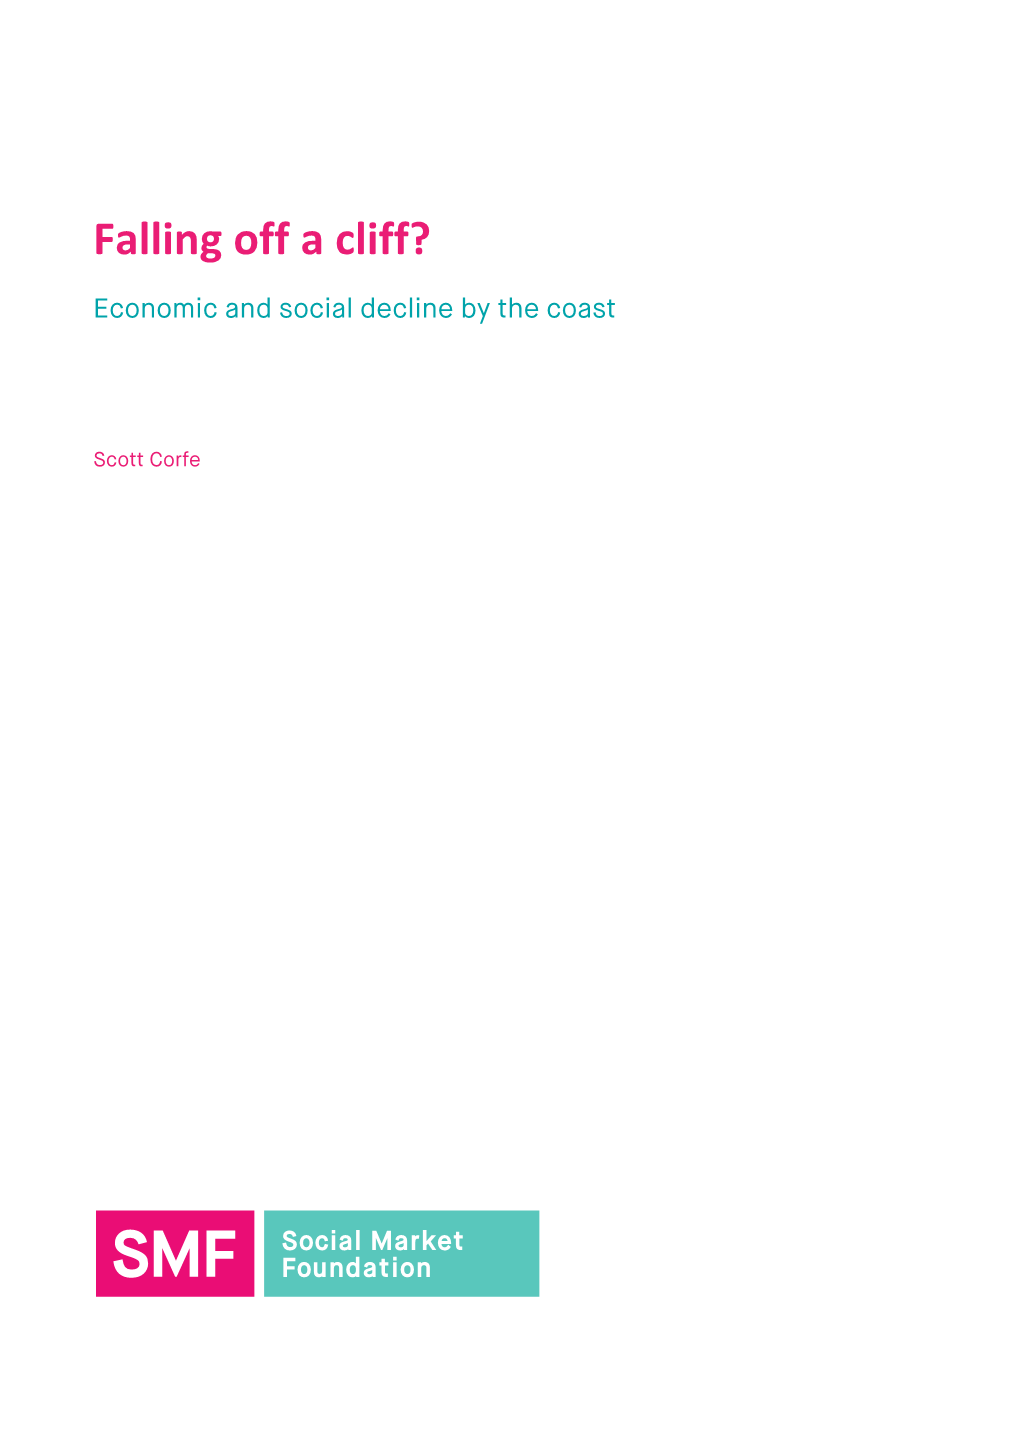 Falling Off a Cliff?